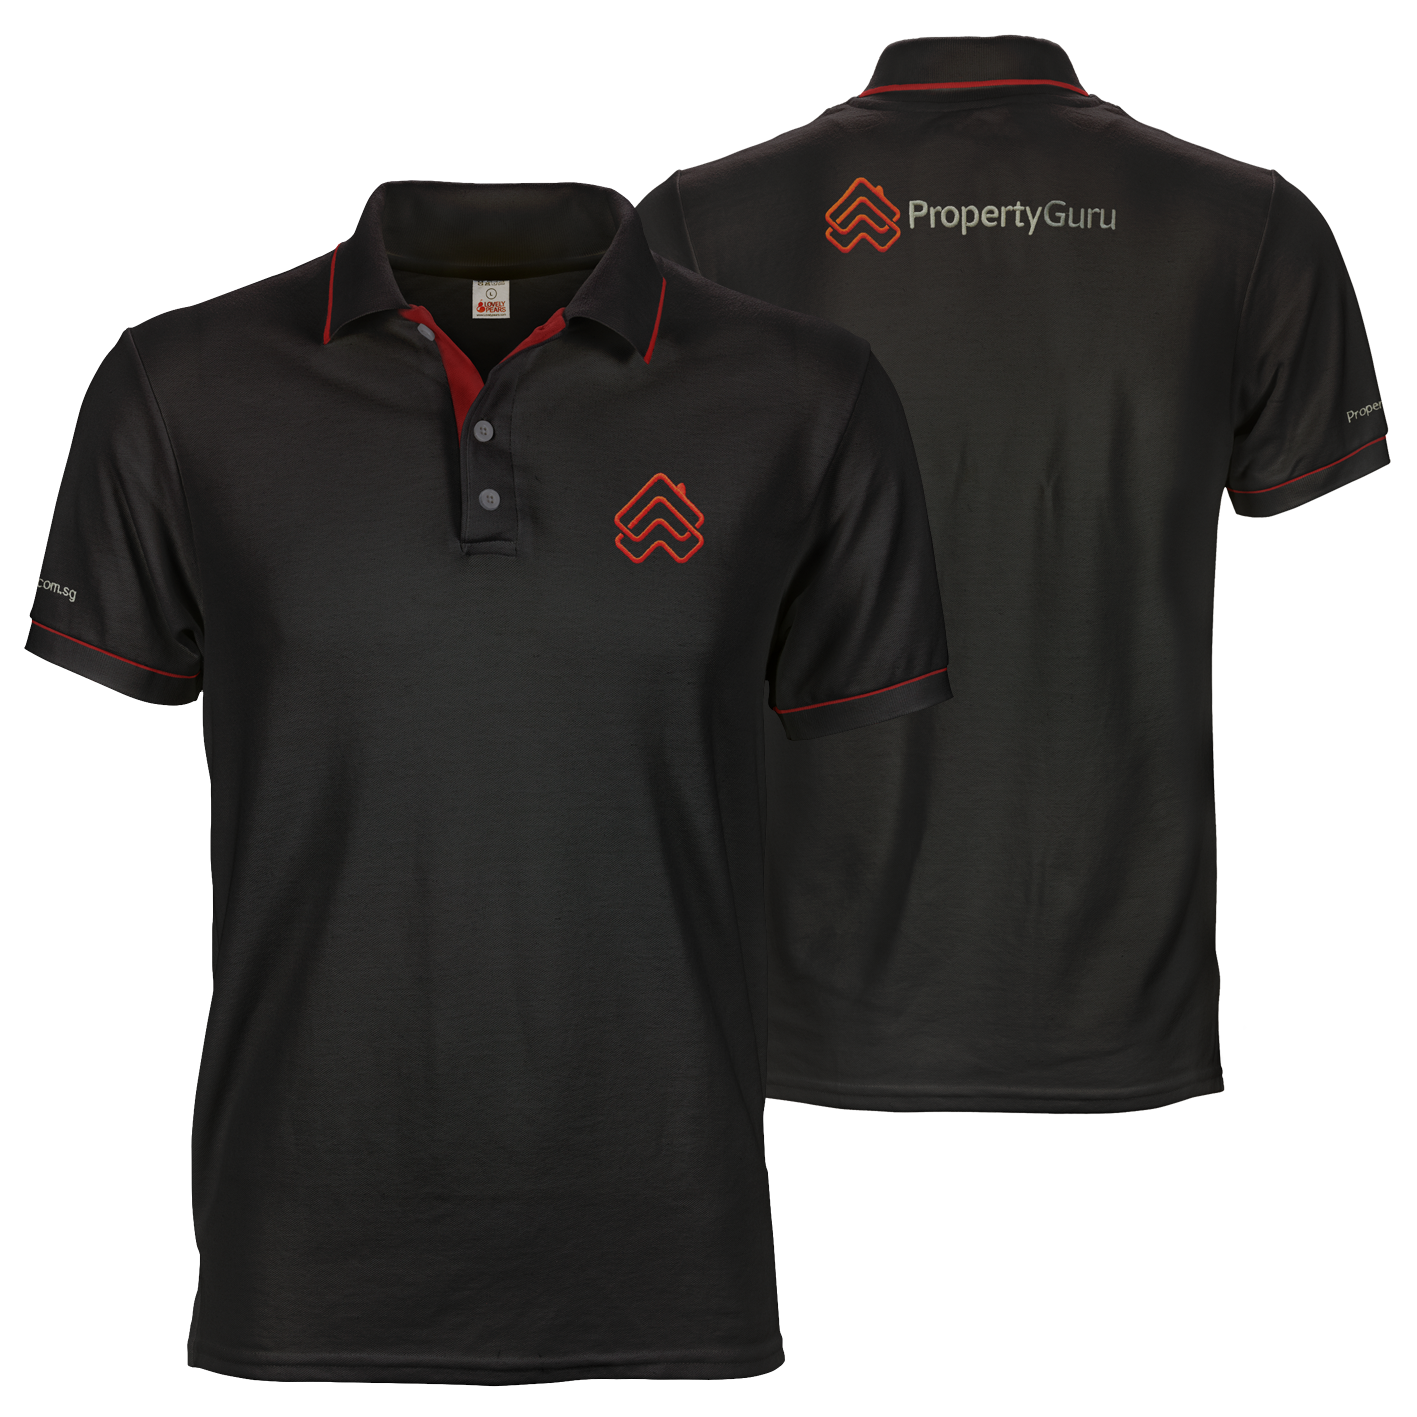 Black propertyguru embroidered polo tee with custom inner placket, collar and cuff piping